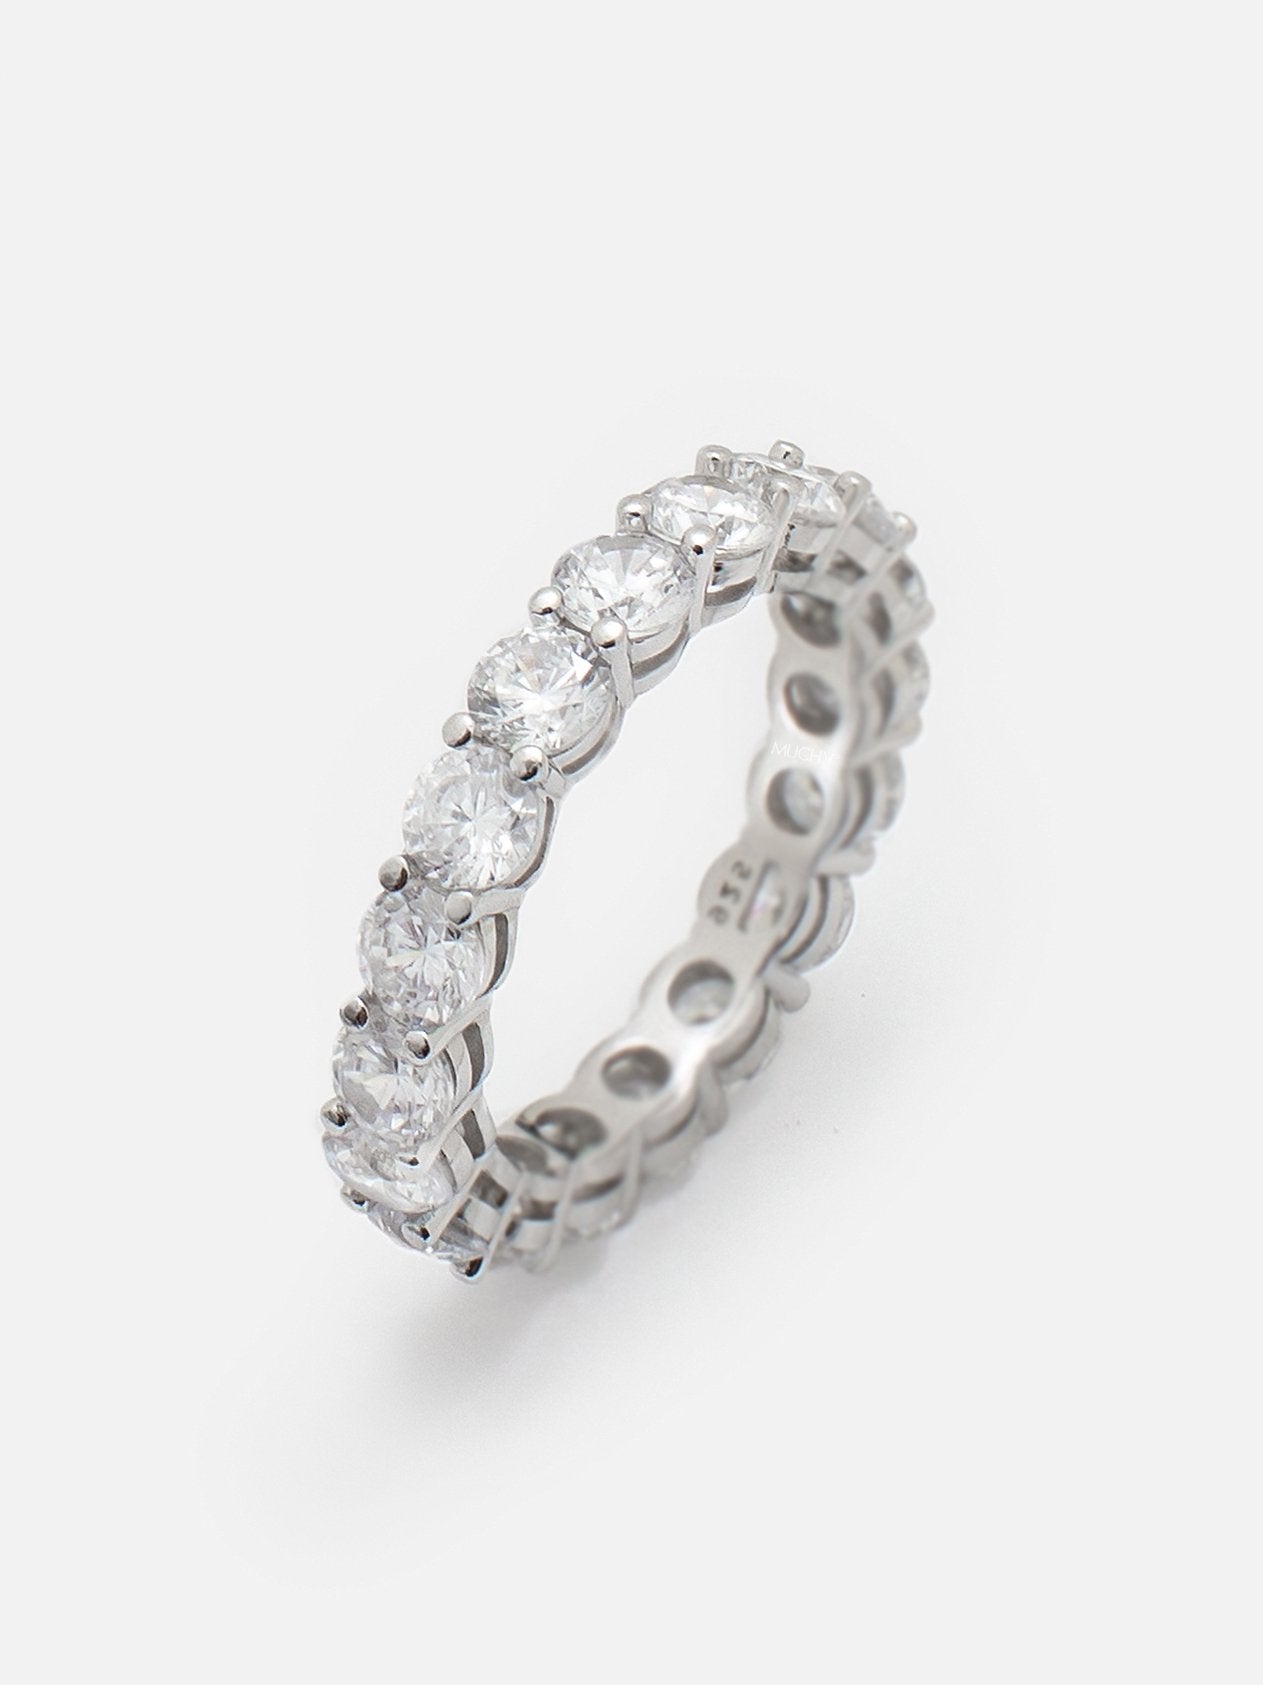 Silver Stacking Ring - Round Cubic Zirconia Stones (18ct White Gold Plated 925 Sterling Silver) - Muchv Jewellery